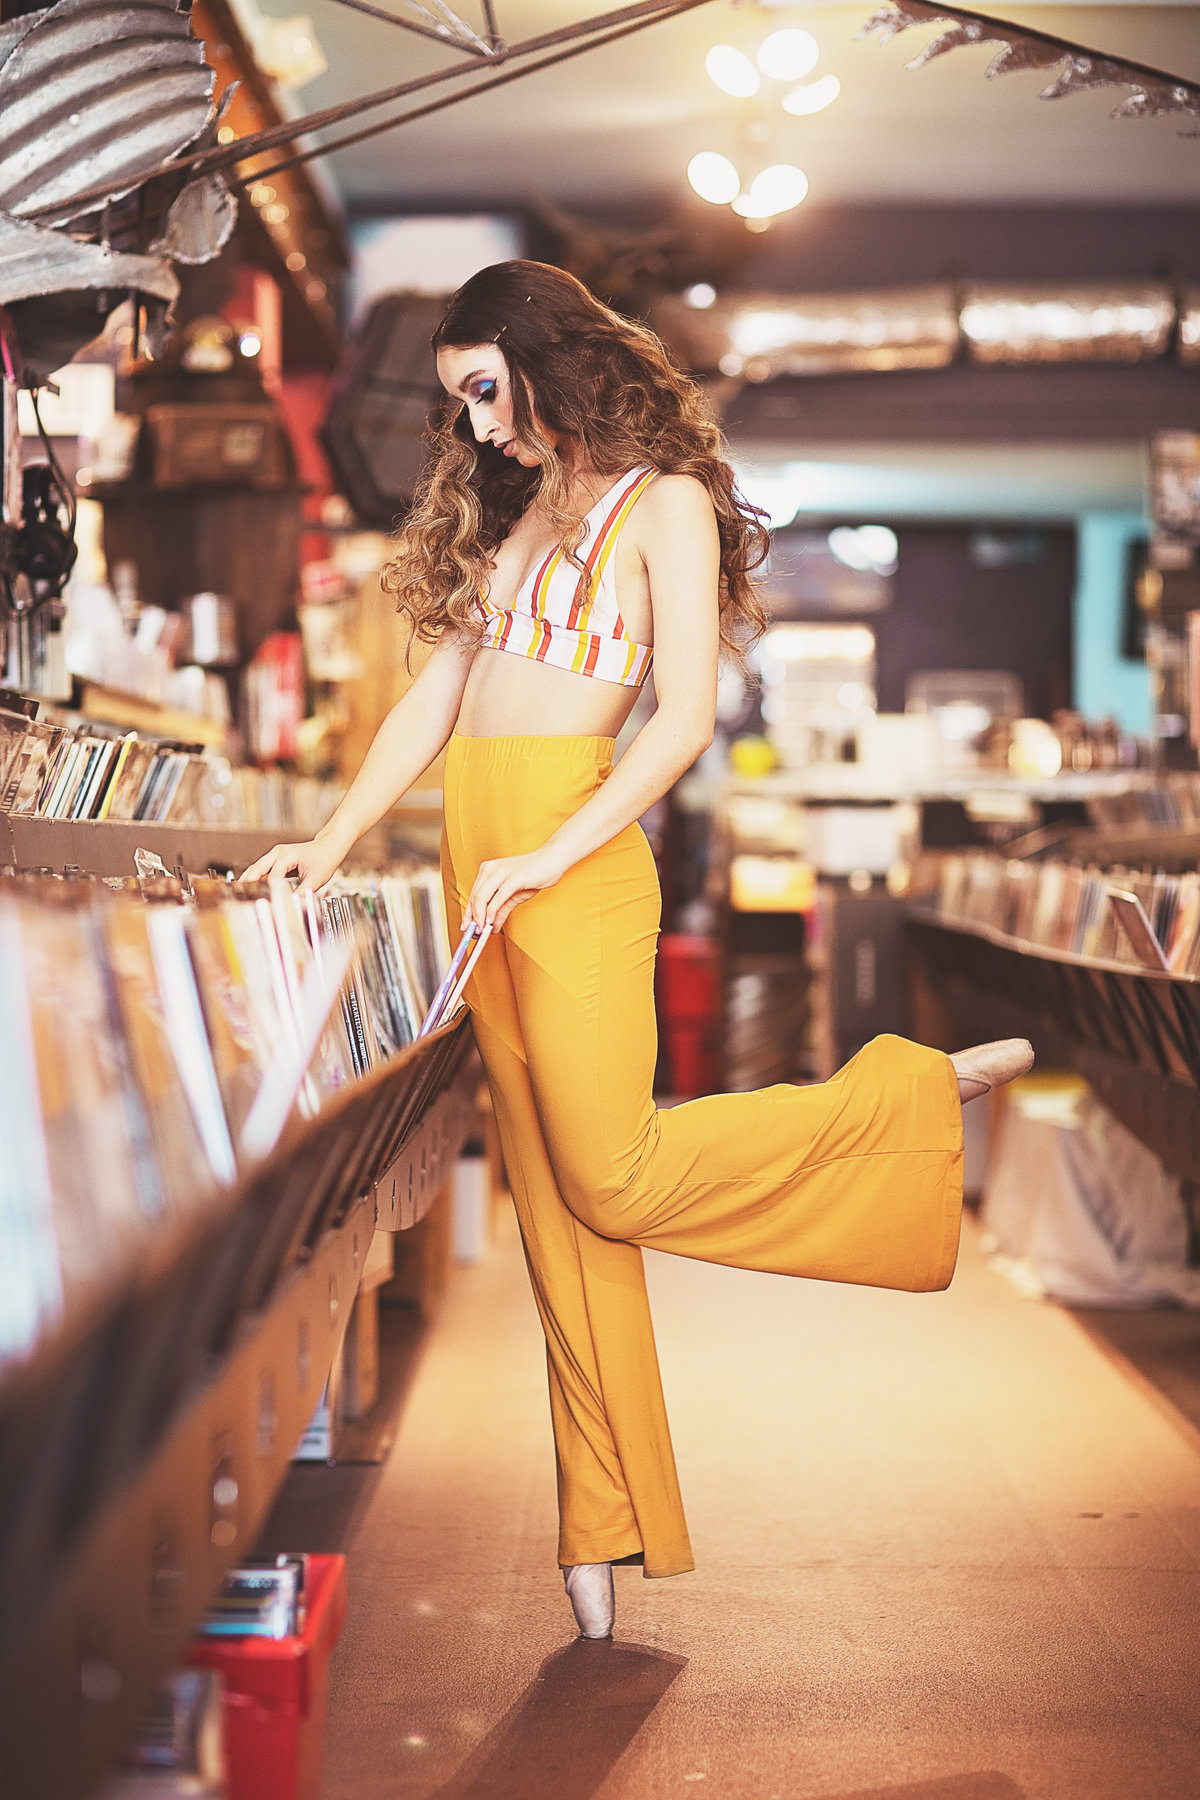 70's themed ballet dancer in pose at record store